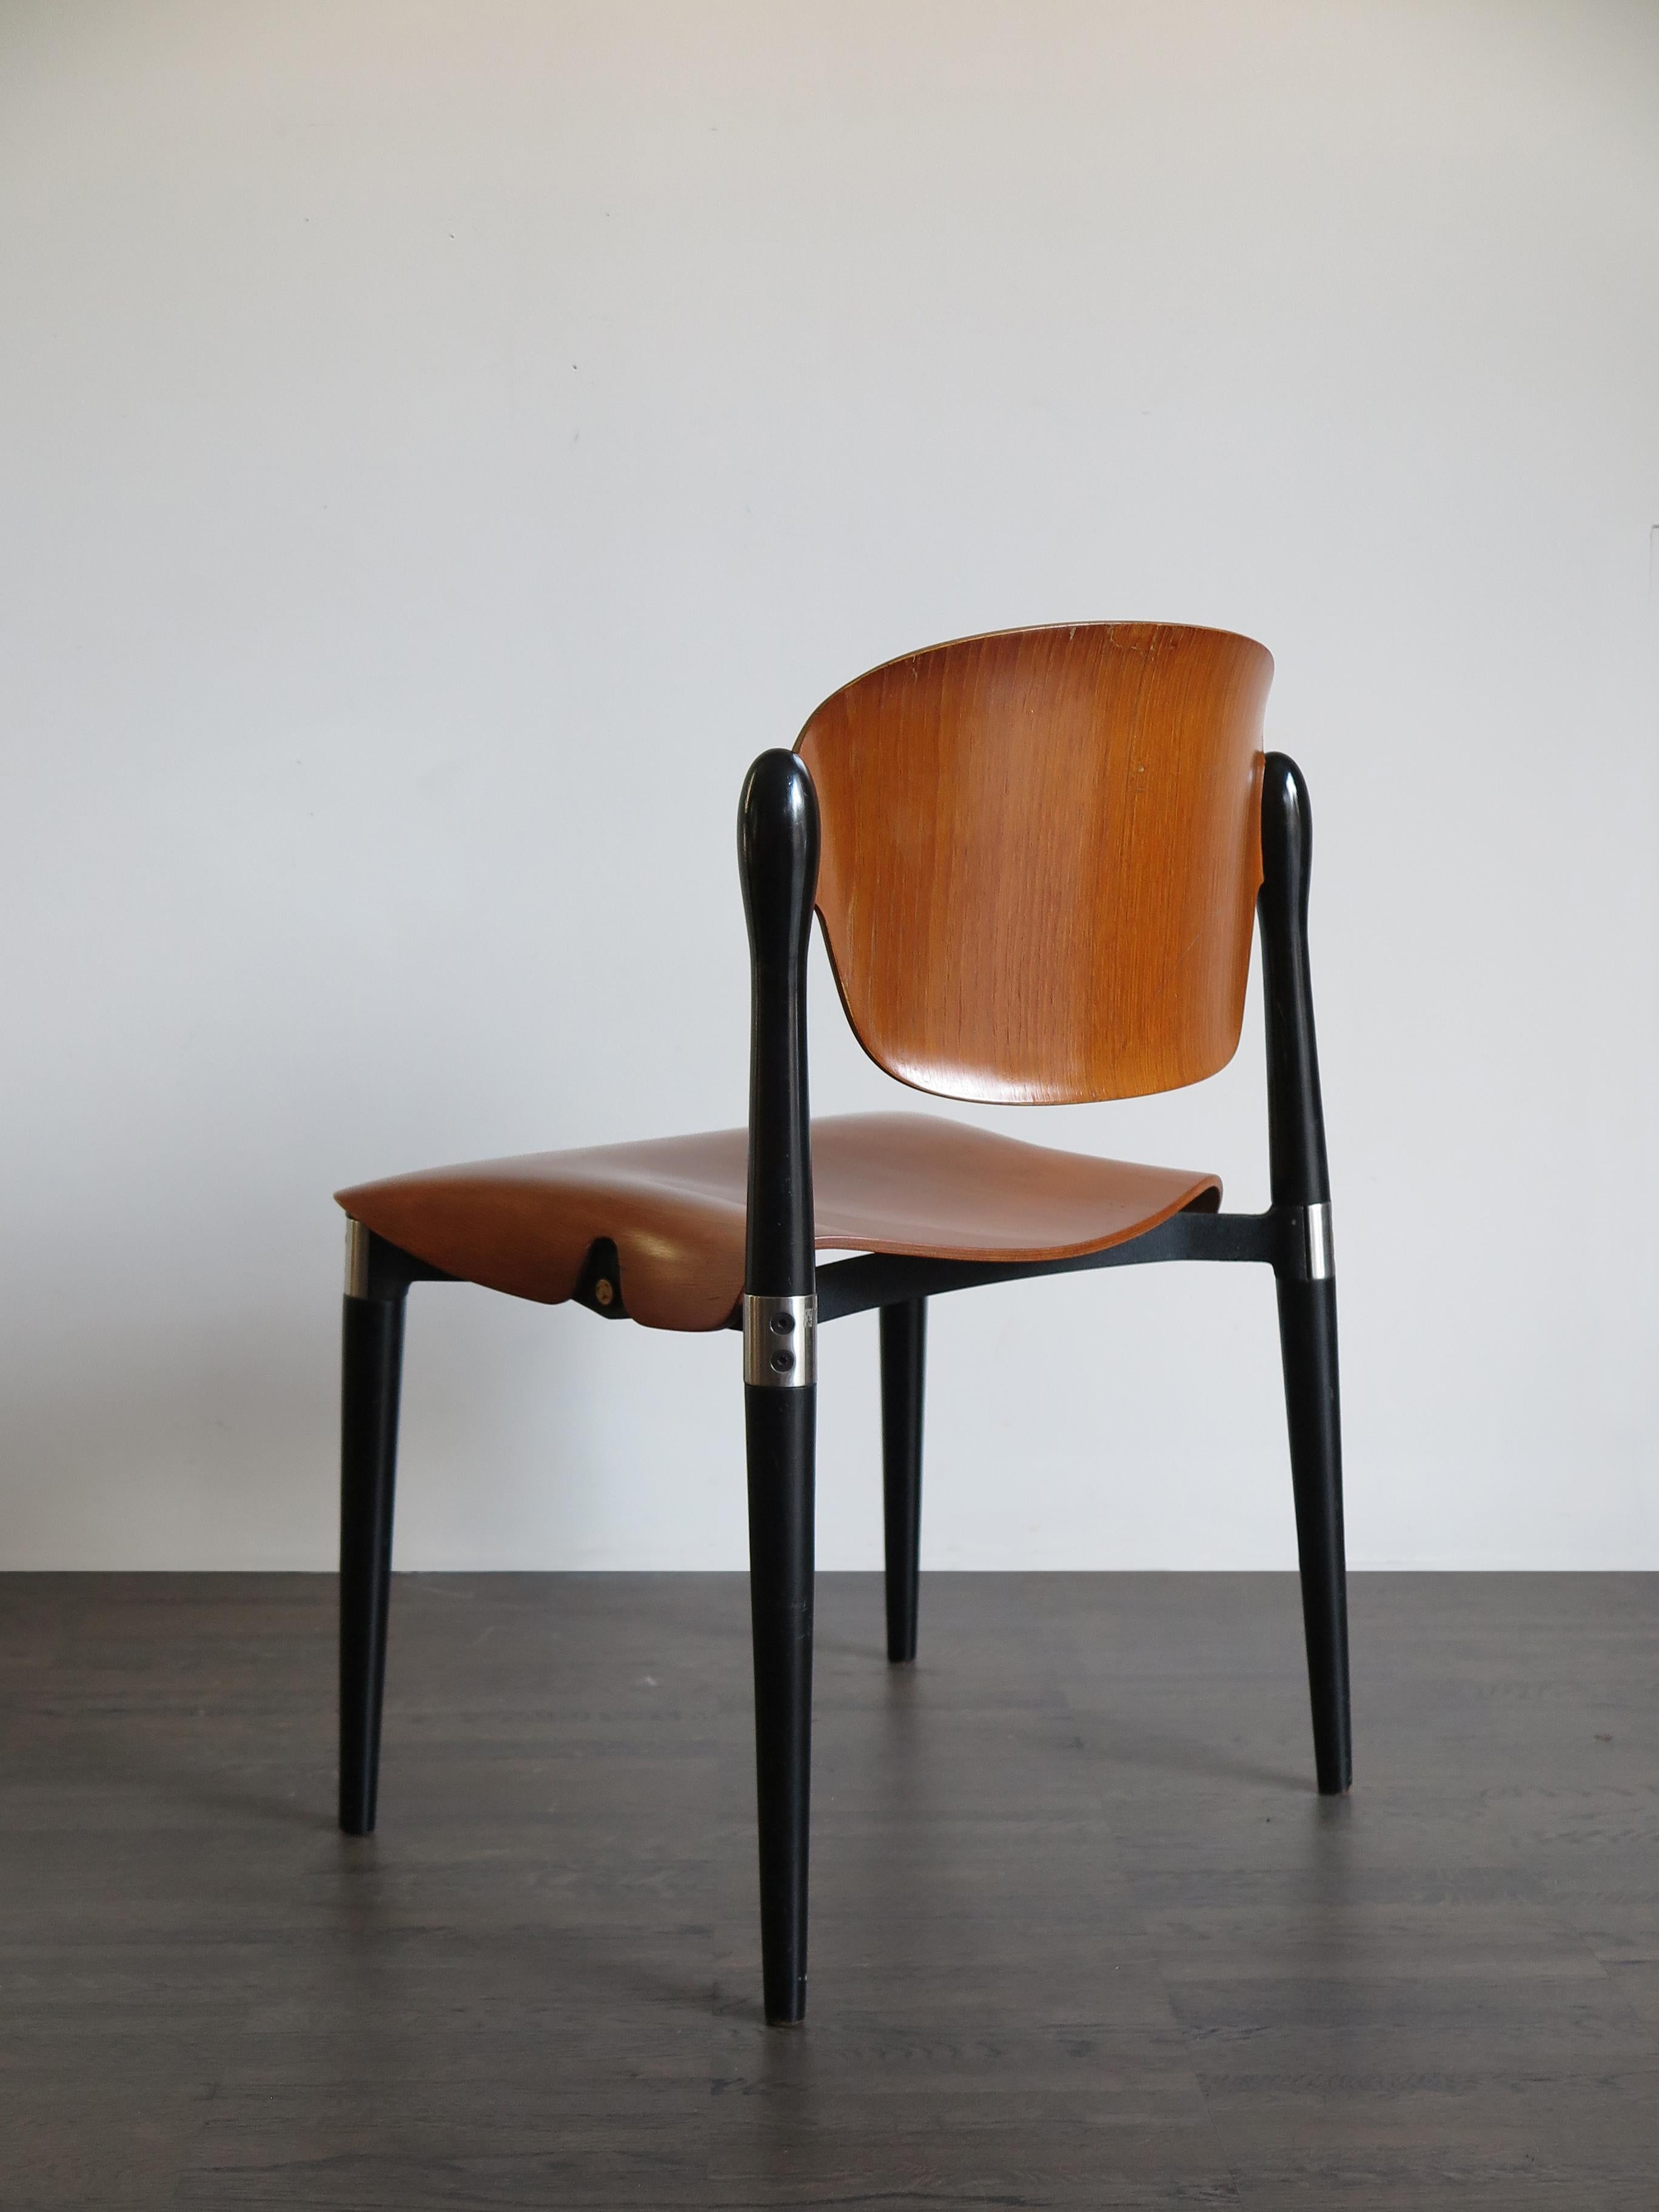 Eugenio Gerli for Tecno Italian Curved Wood Dining Chairs Model “S832”, 1962 4